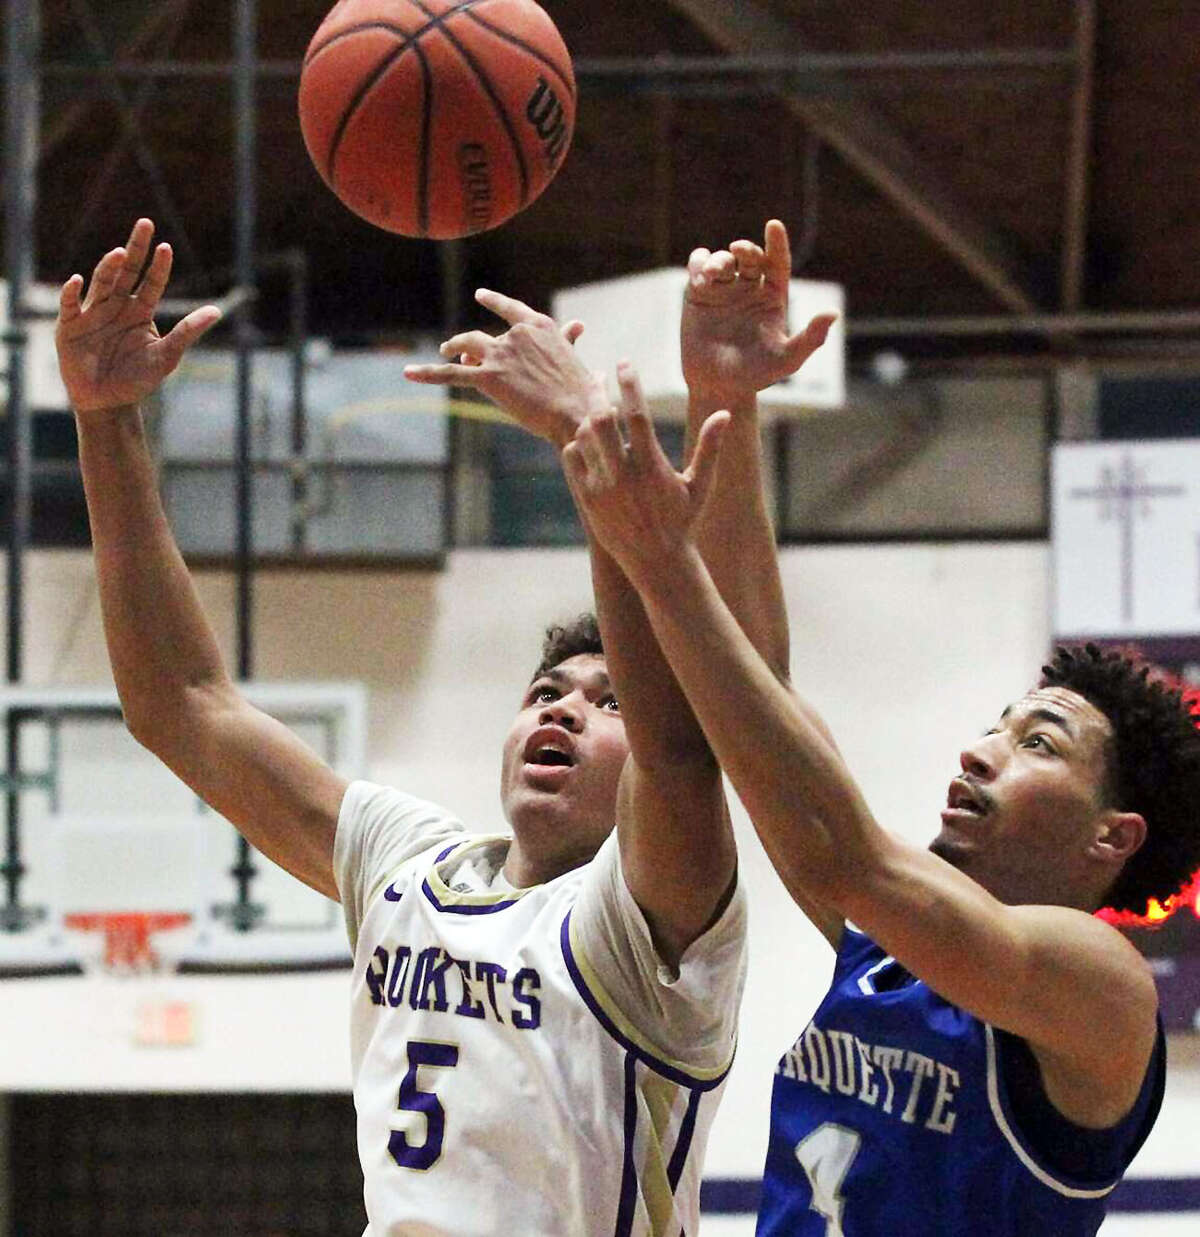 Marquette's Kendall Lavender, right, and Jacksonville Routt's Michael Wilson go for a rebound during Tuesday night's game at the Routt Dome in Jacksonville. Routt won, 54-41.